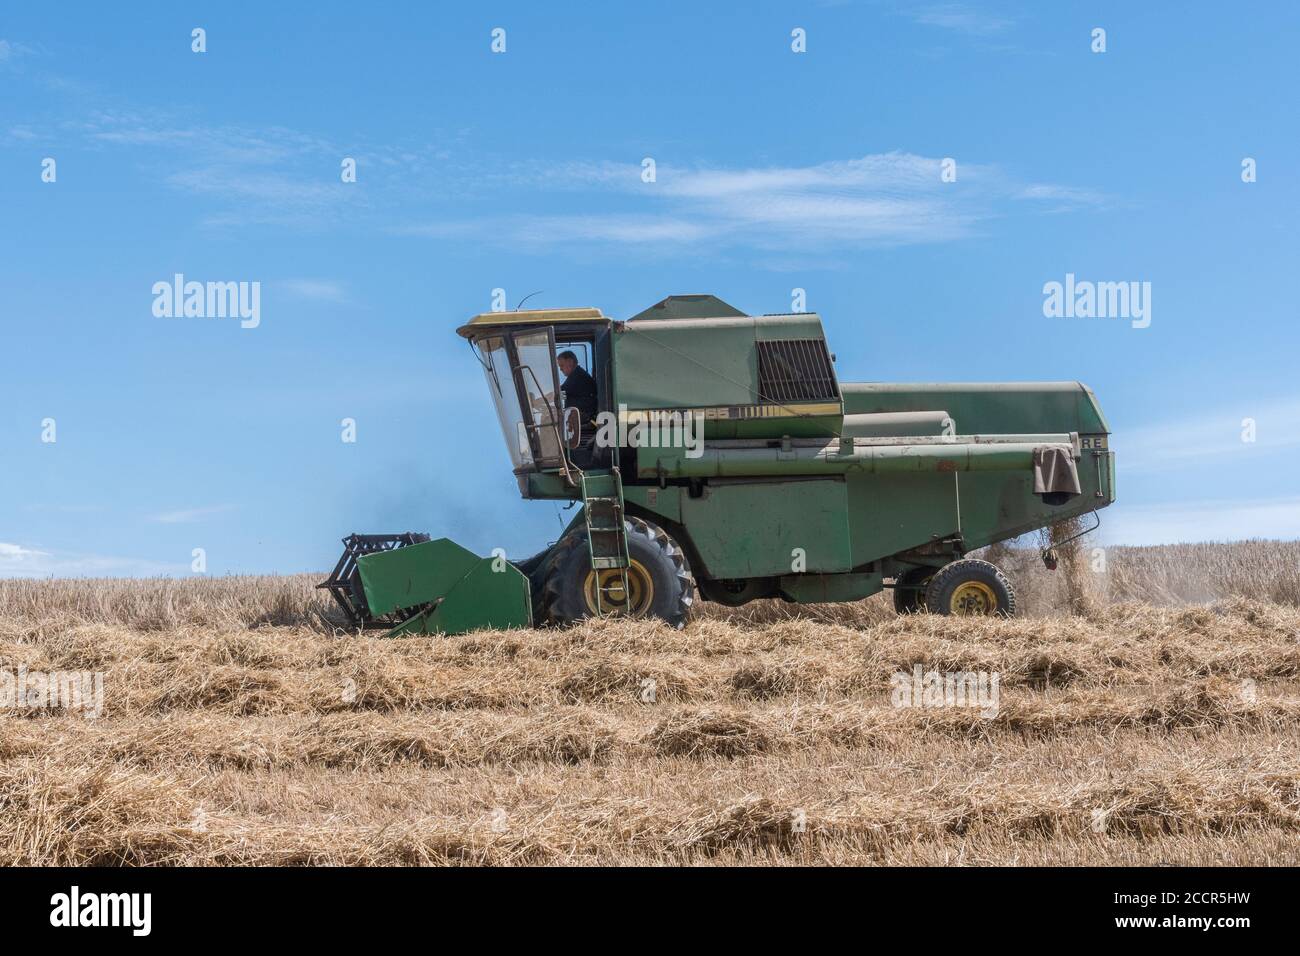 John Deere combine harvester cutting wheat crop in summer sun. Front header, tine reel, side pipe, & straw walker visible. For 2020 UK wheat harvest. Stock Photo